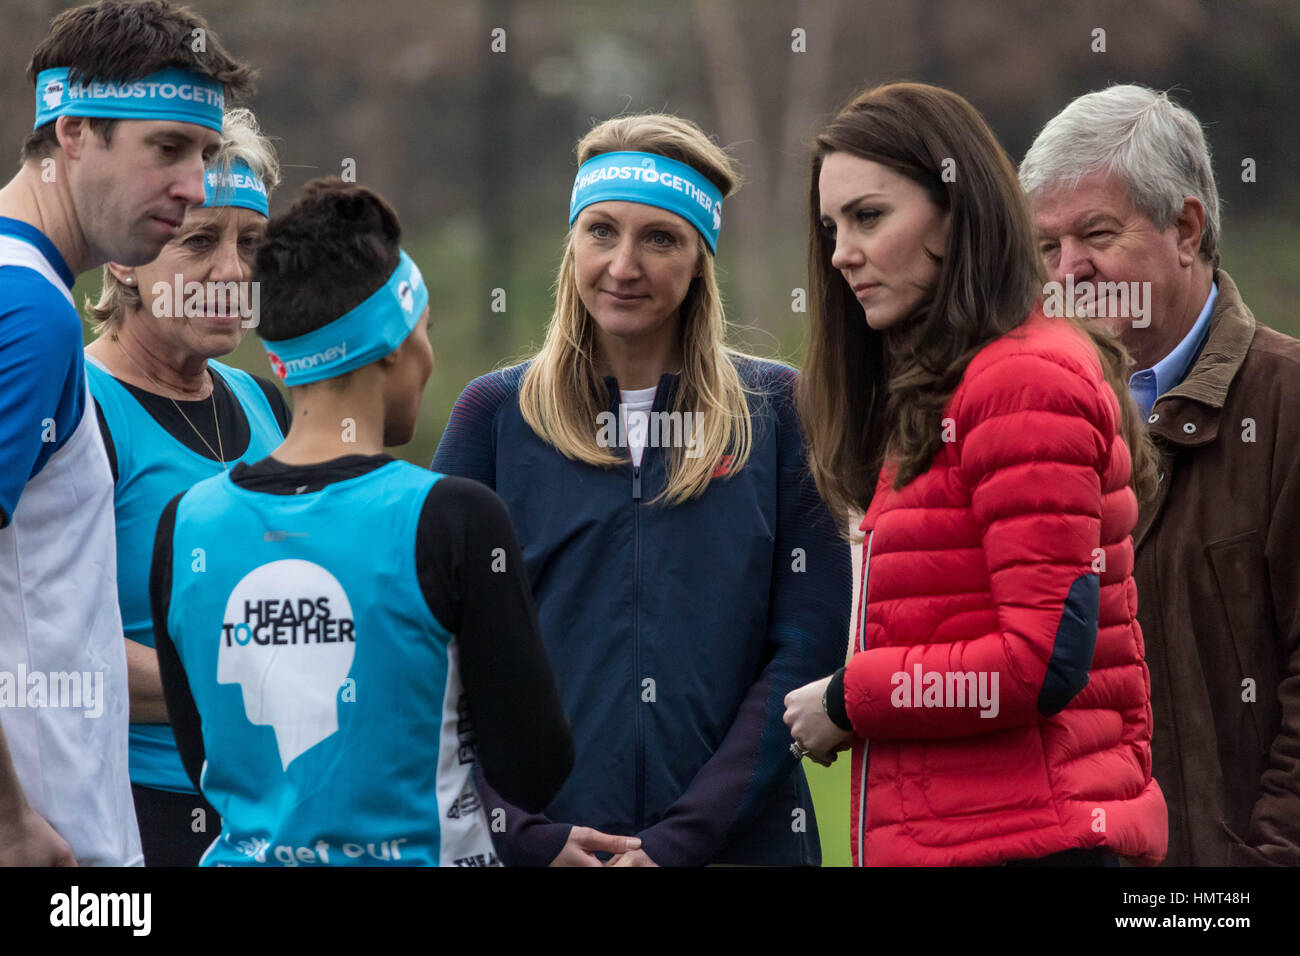 London, UK. 5th February, 2017. The Duchess of Cambridge (Kate Middleton) with athlete Paula Radcliffe join a training day at the Queen Elizabeth Olympic Park with the runners taking part in the 2017 London Marathon for Heads Together, the official charity of the year. © Guy Corbishley/Alamy Live News Stock Photo